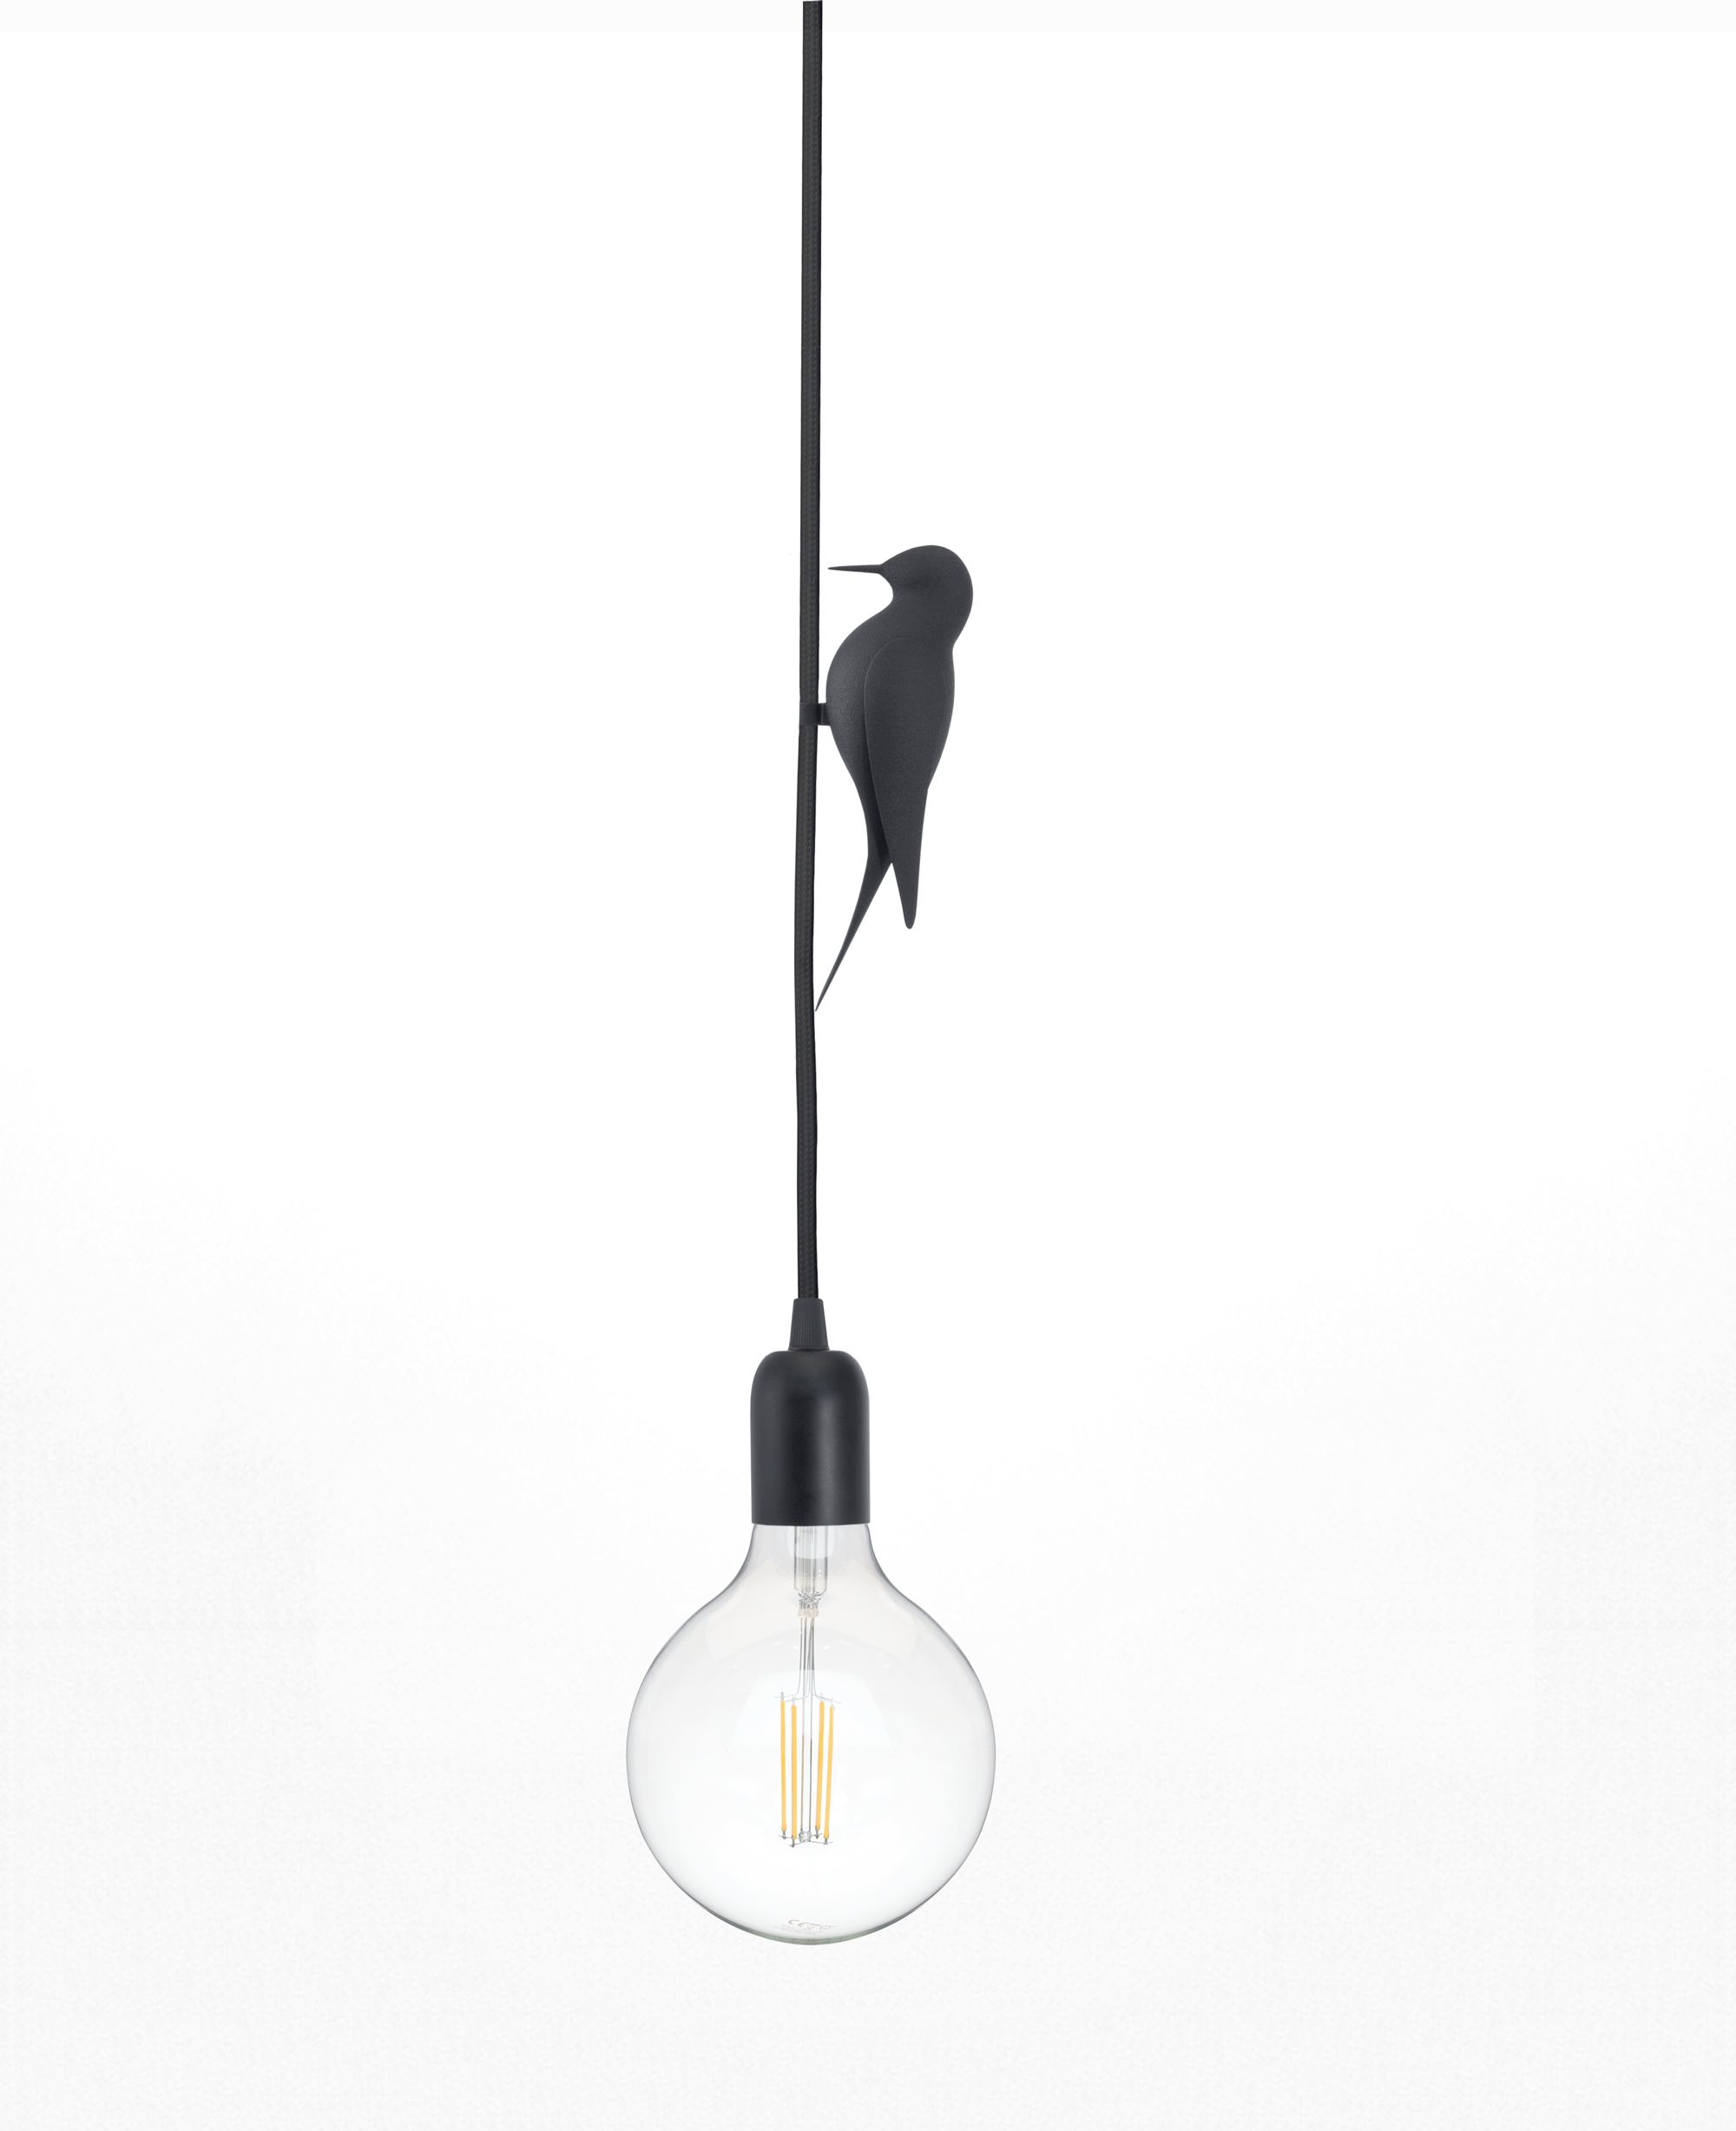 https://studiomacura.com/wp-content/uploads/2018/10/LETI_Studio-Macura_all-colors-with-lamp.gif